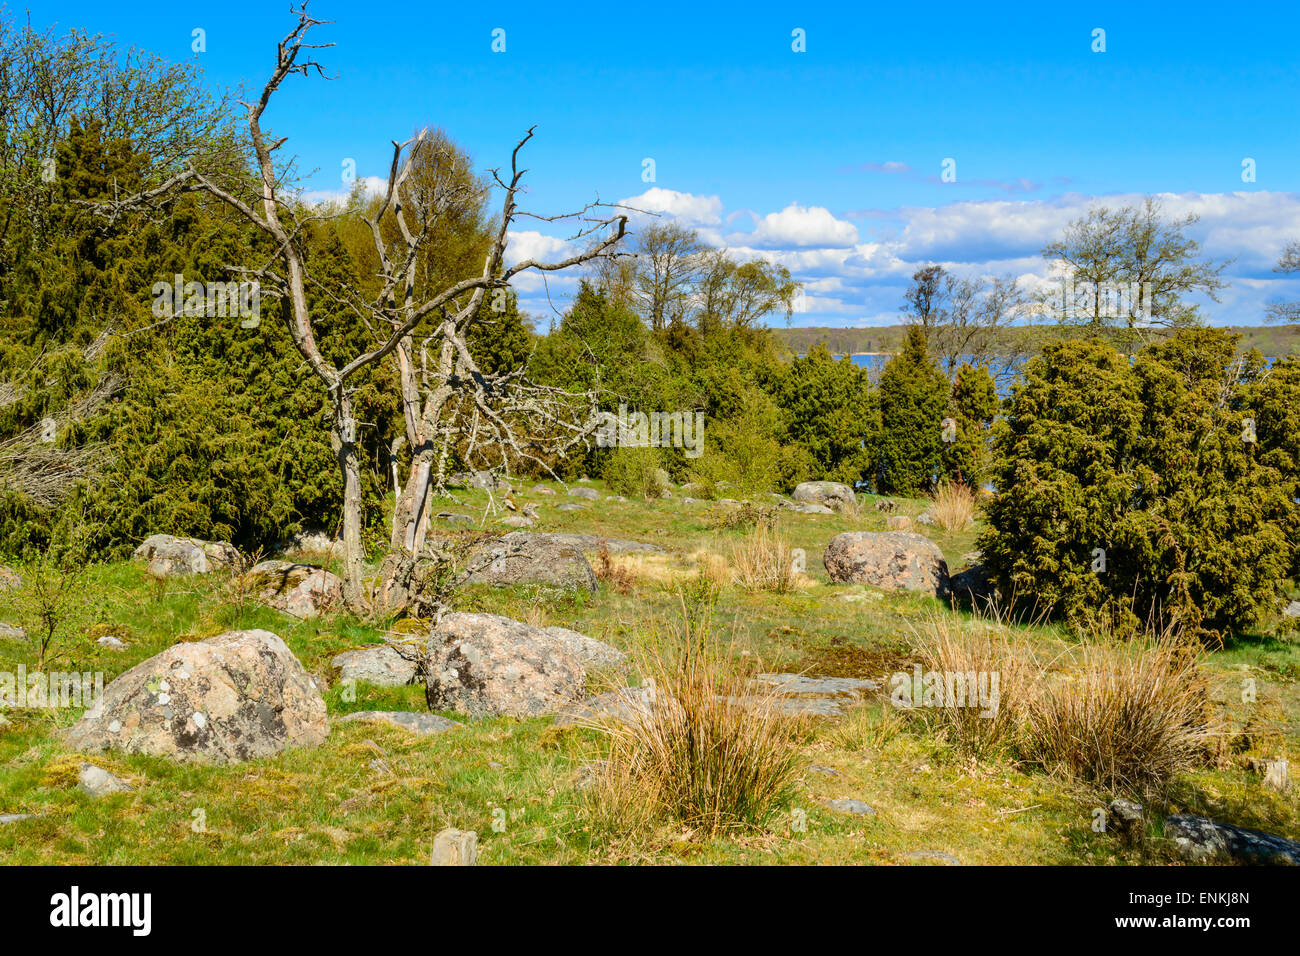 Typical nature in the southern swedish archipelago with juniper and grassland. Landscape is barren with boulders of granite in t Stock Photo